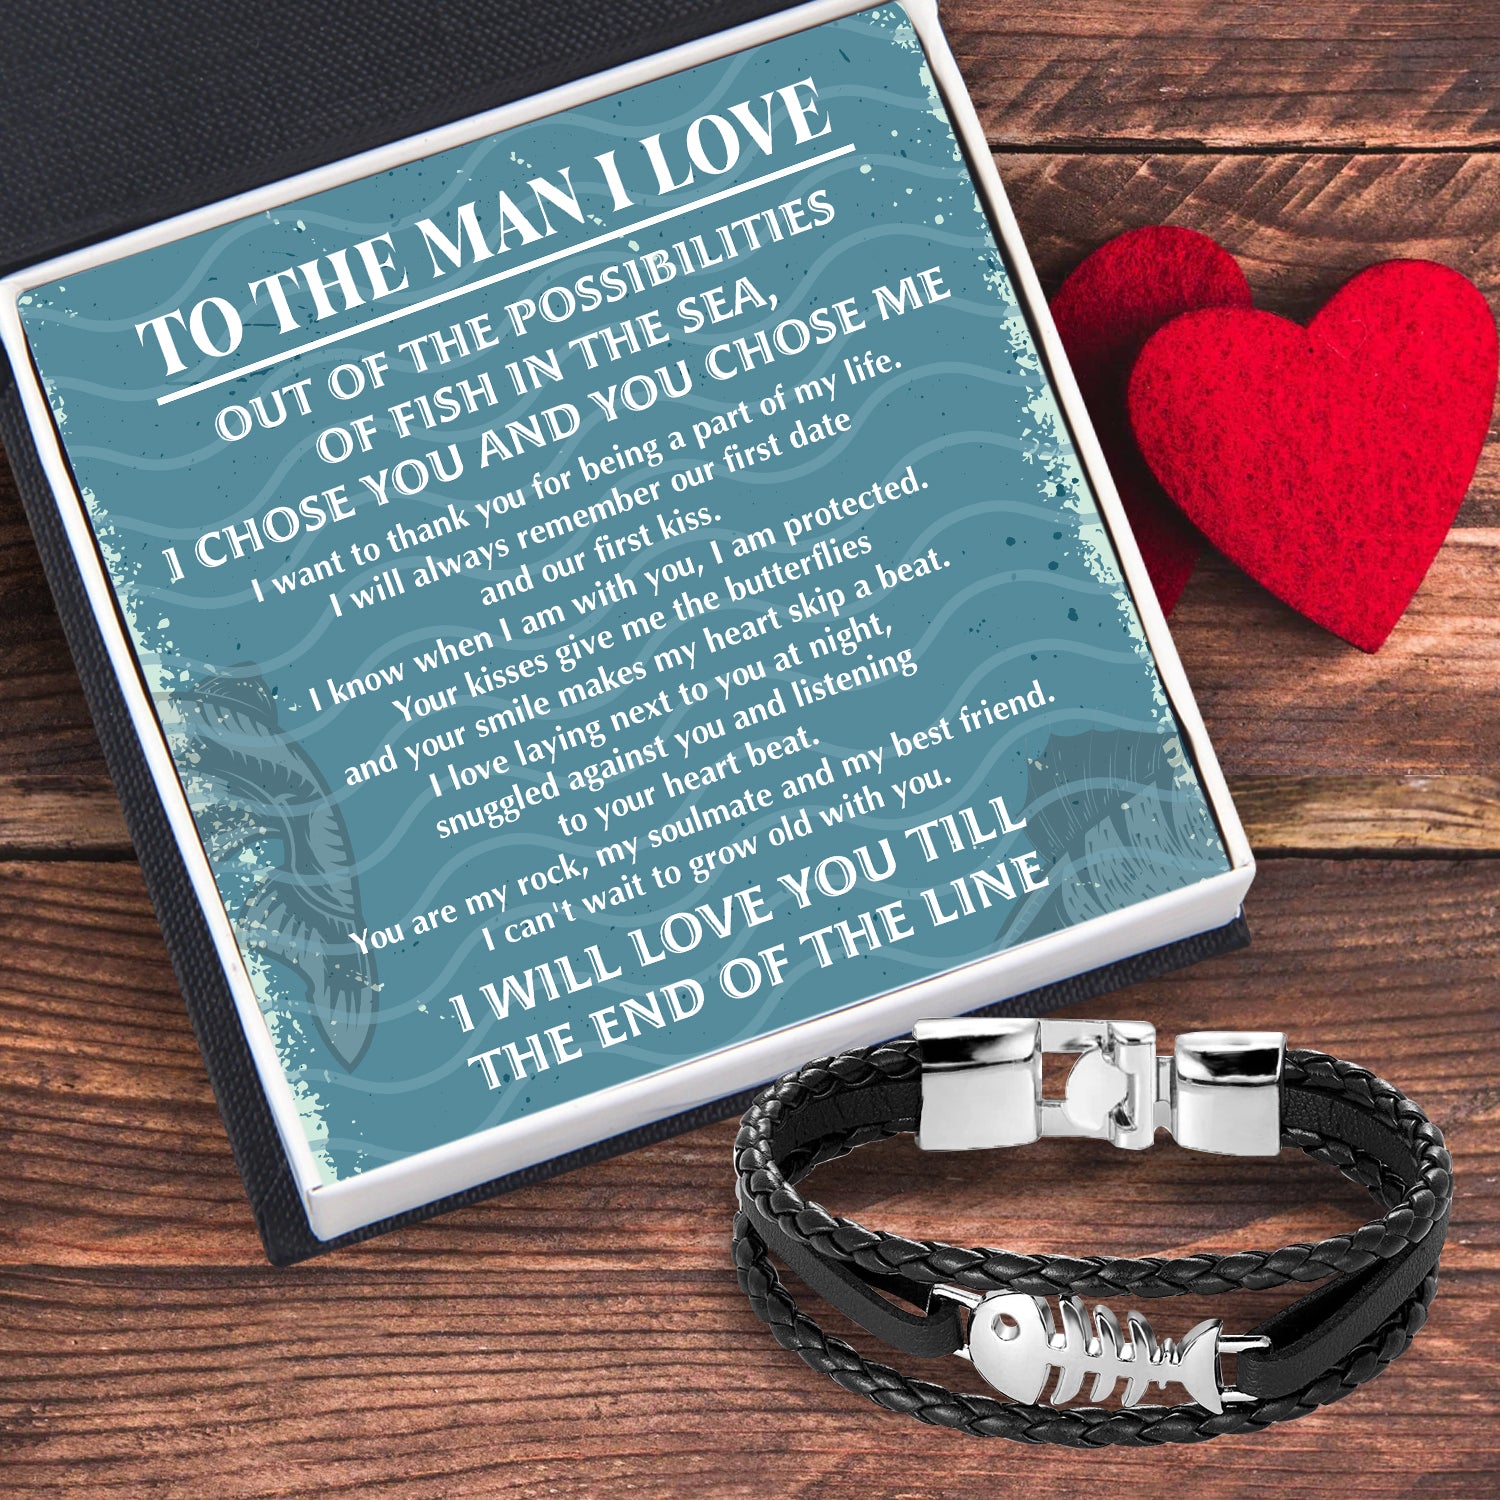 Fish Leather Bracelet - Fishing - To The Man I Love - You Are My Rock - Ukgbzp14002